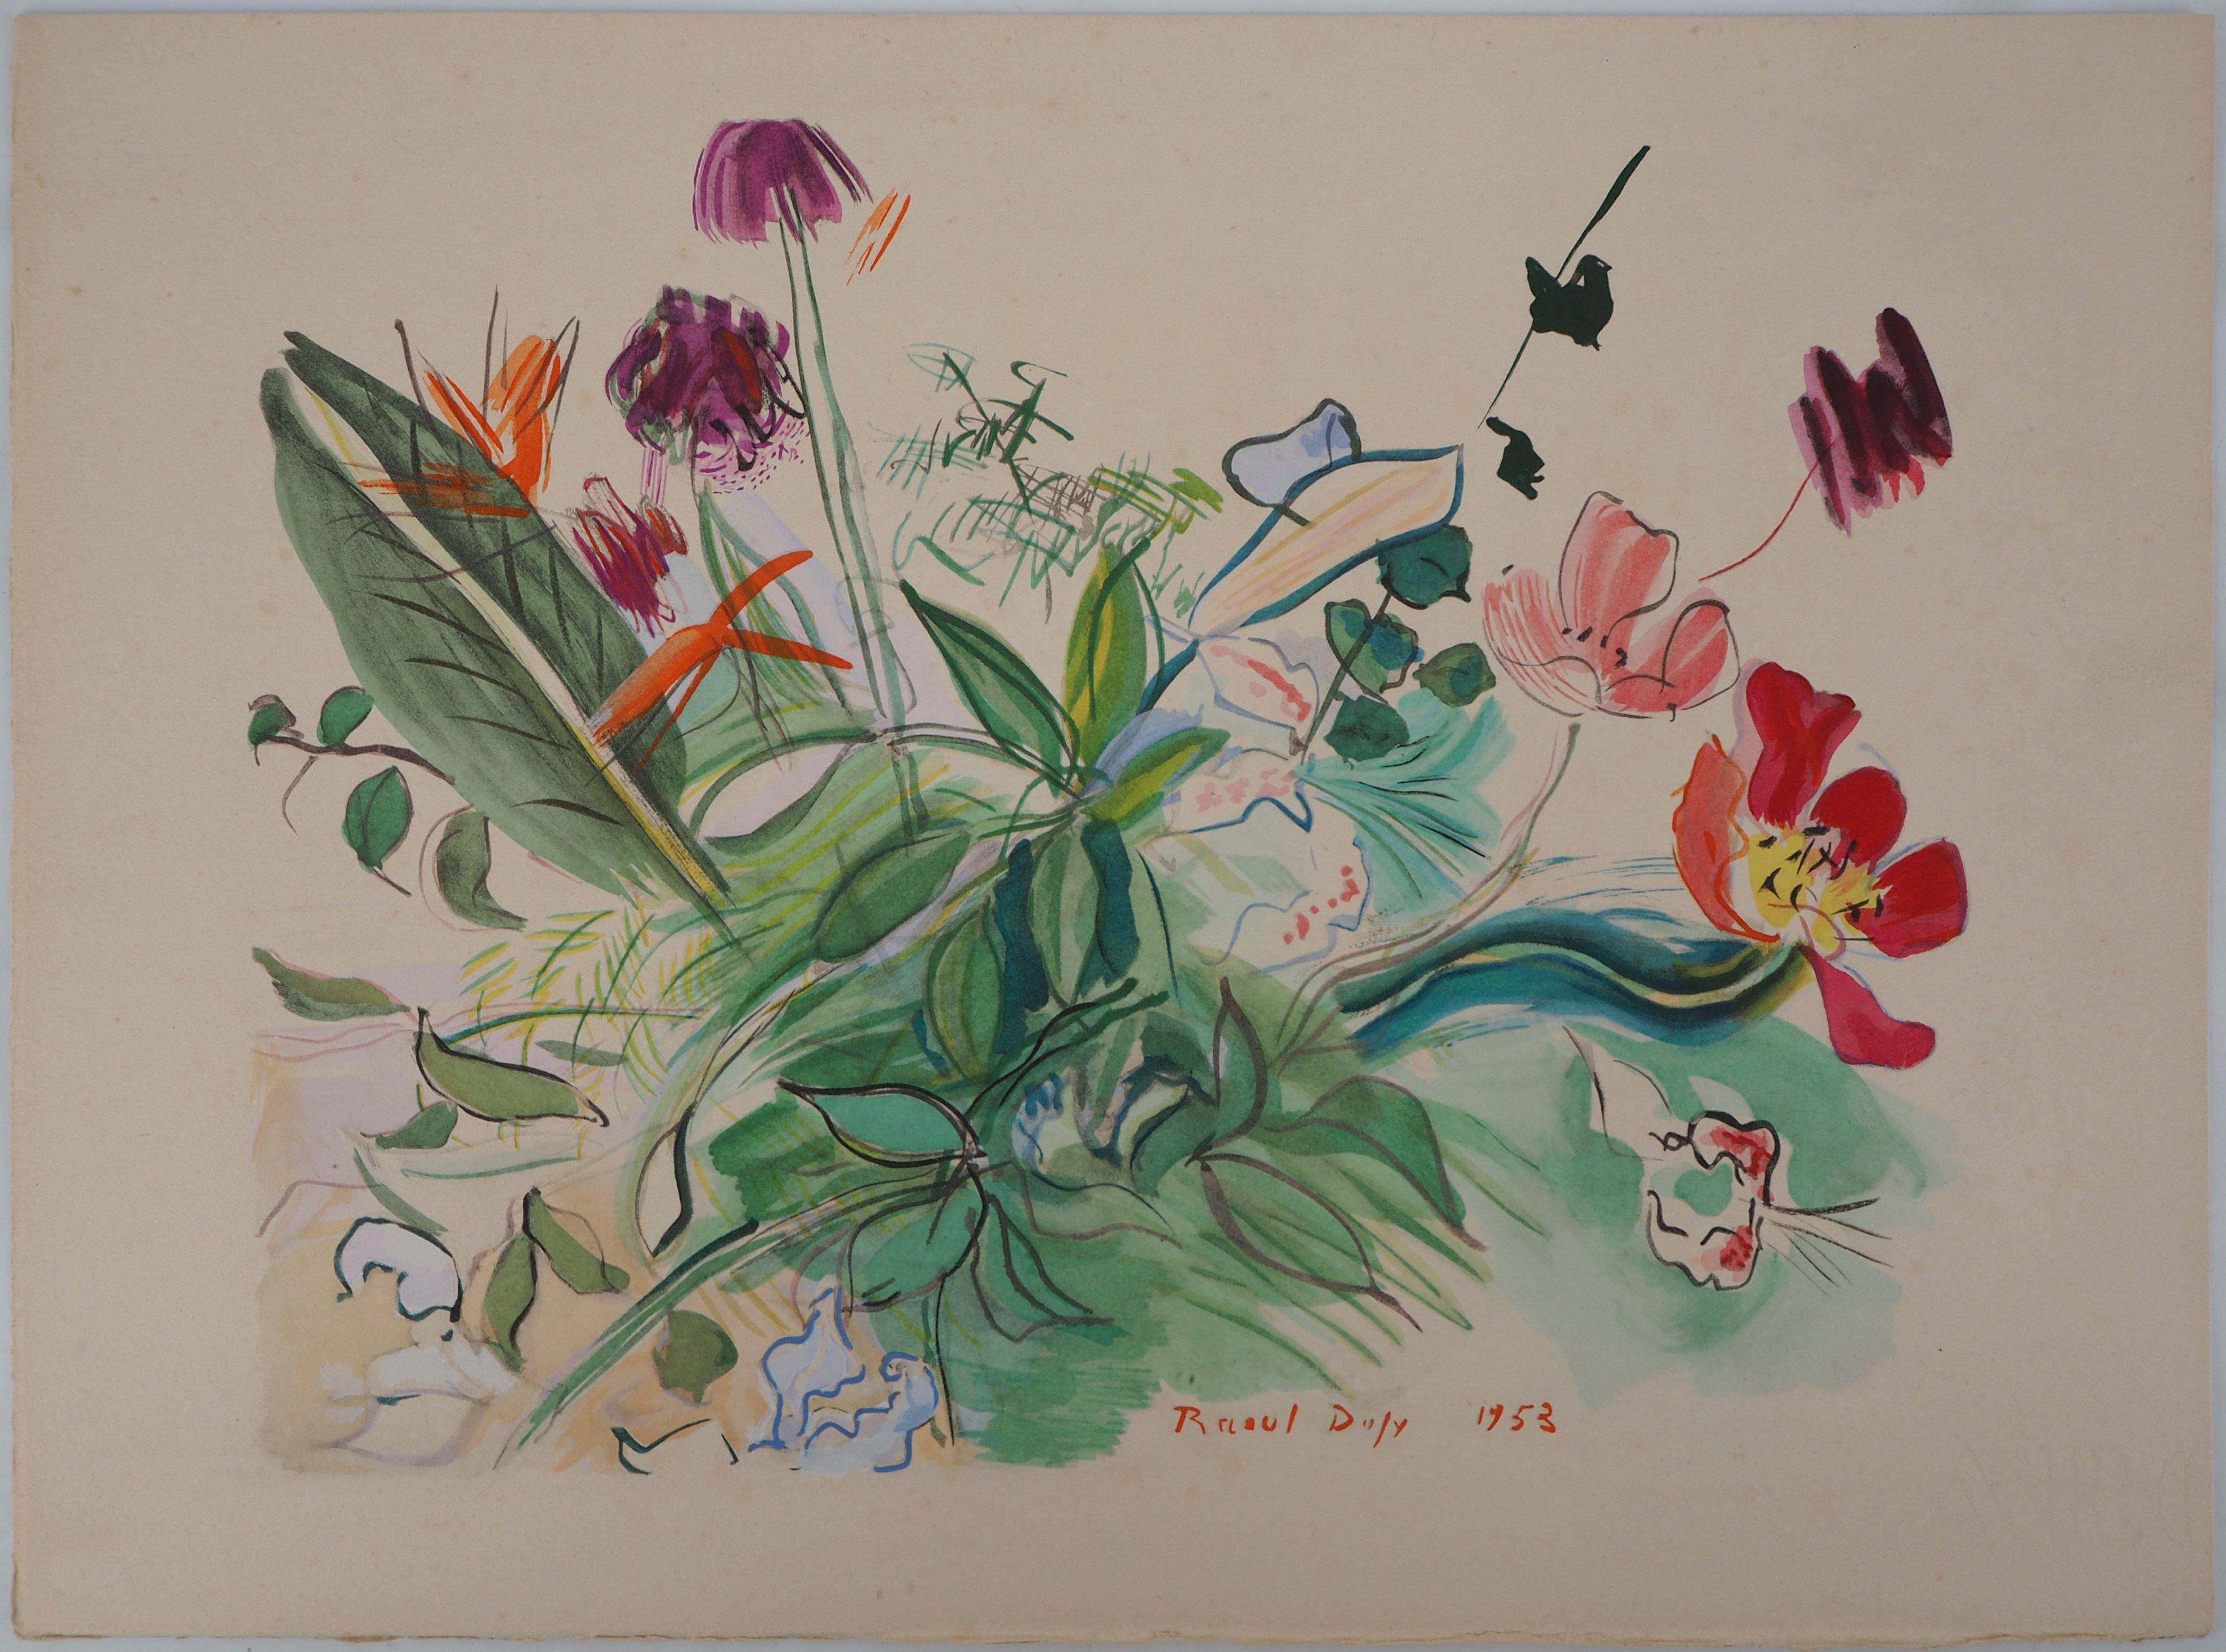 Bunch of Flowers - Original Lithograph - Print by Raoul Dufy